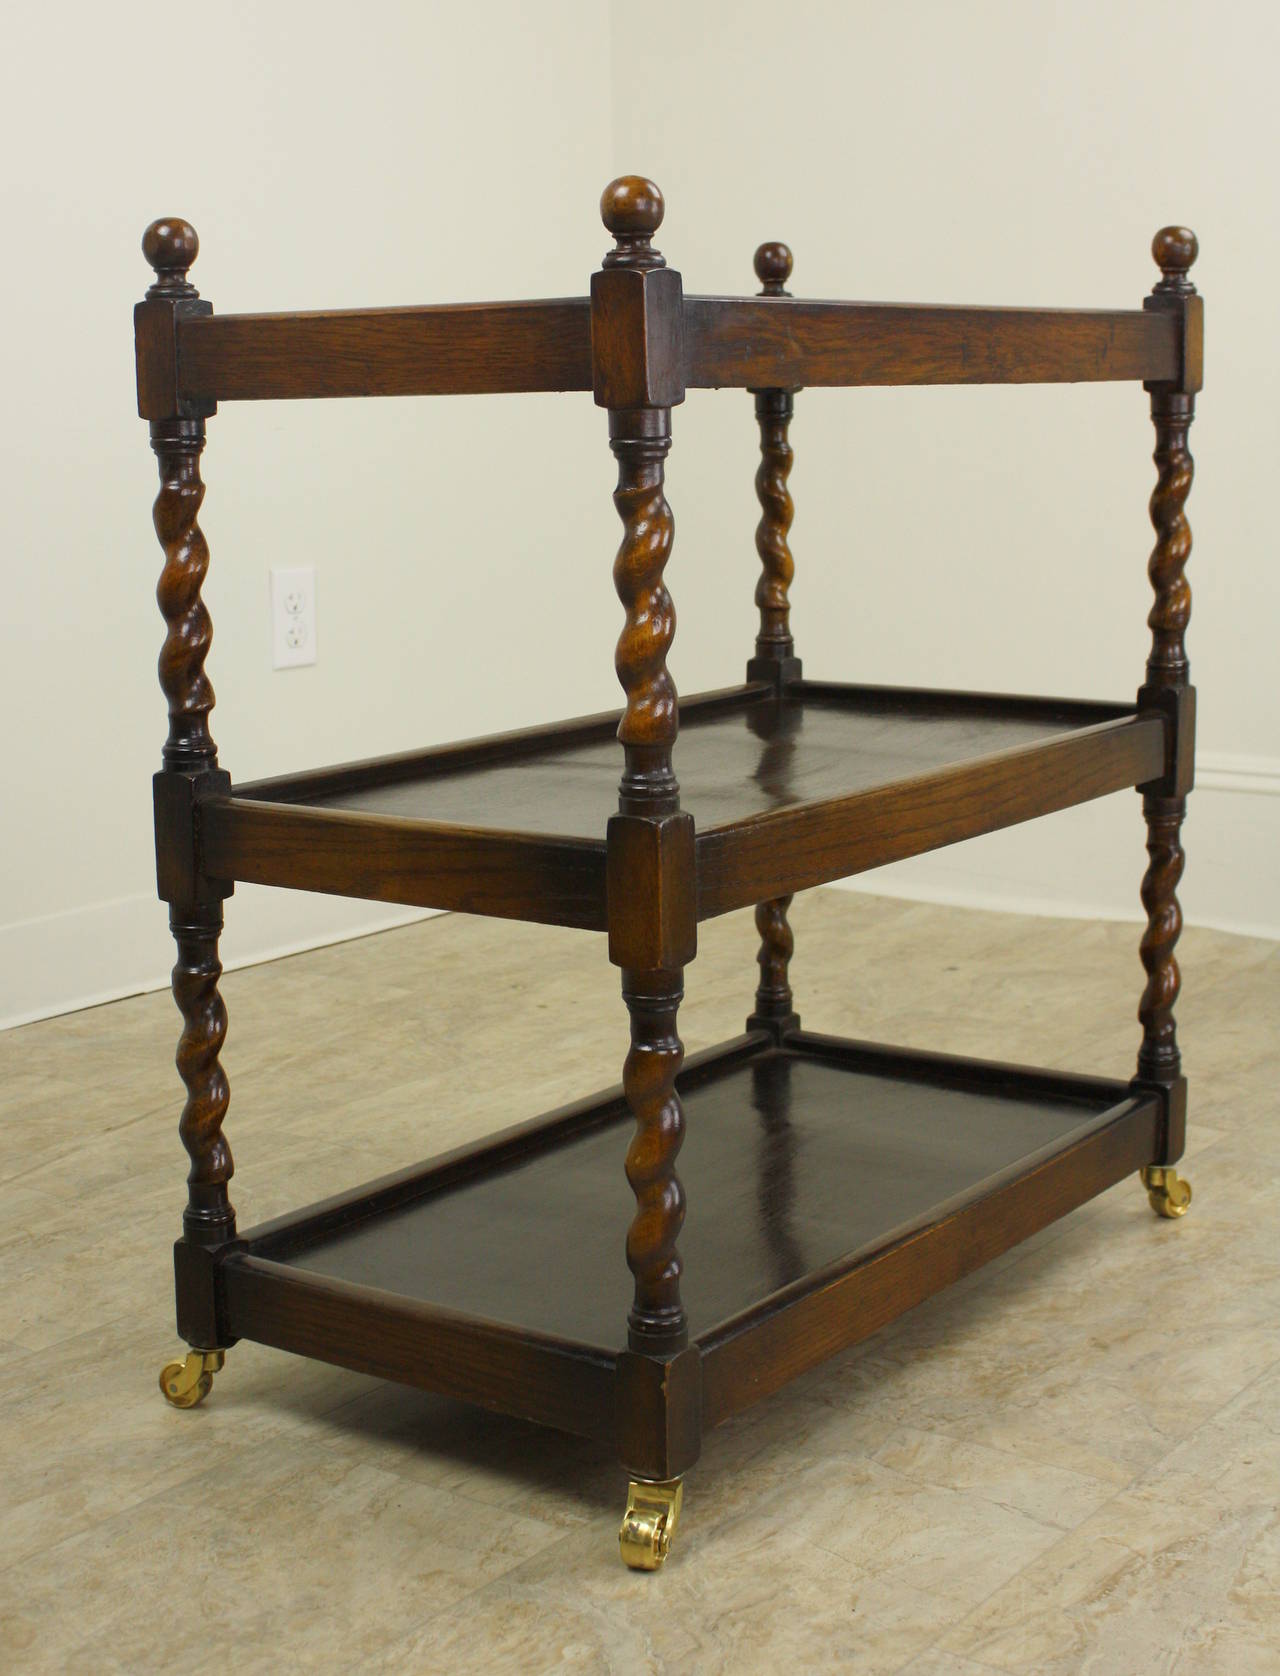 Charming three-tier bar cart. Rich dark oak, with decorative barley twist legs with small rounded tops. Original castors. There are 9.5